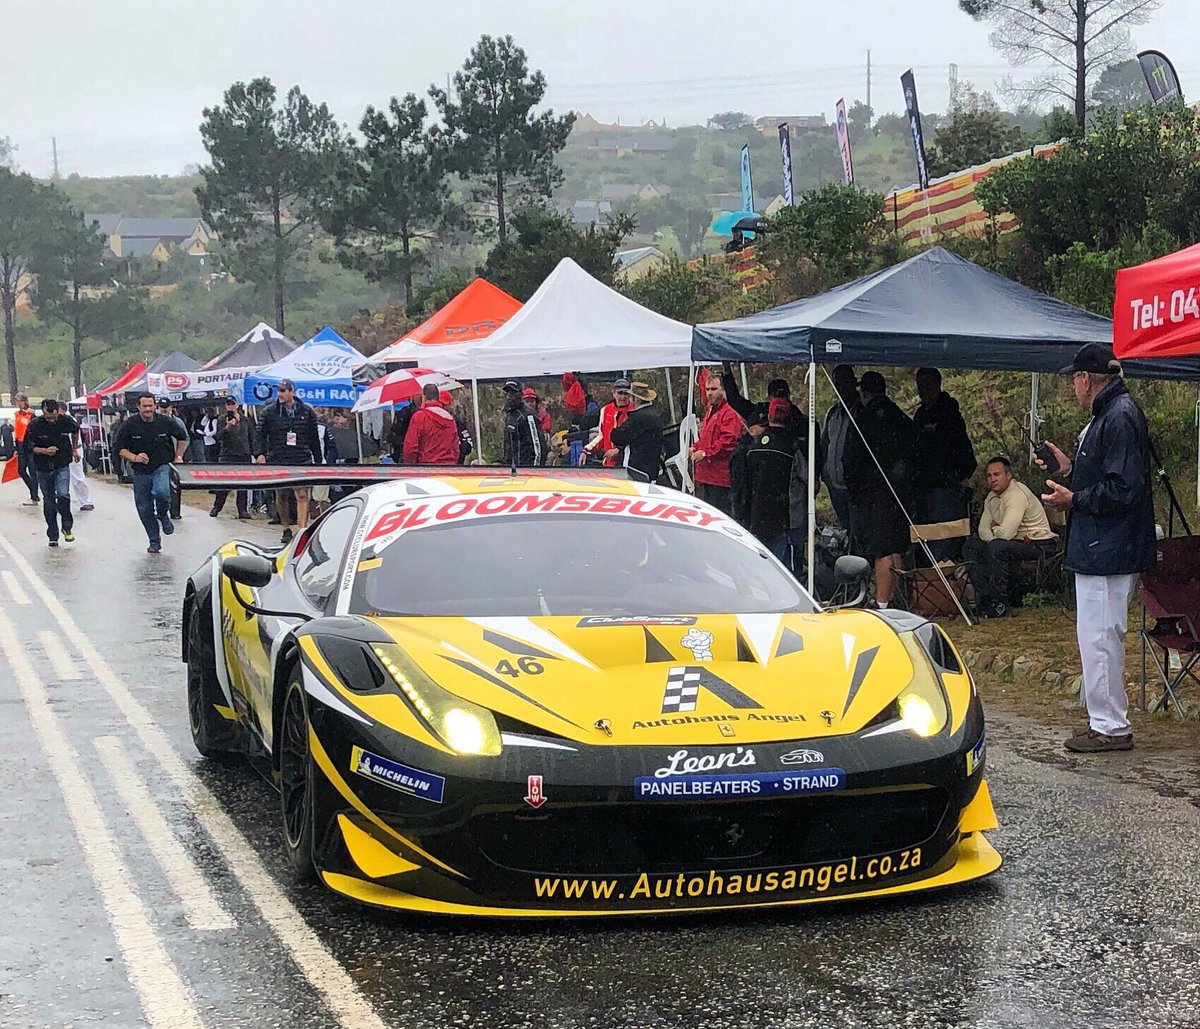 This is what was hiding under the covers last night... 

Mean Ferrari 458 GT3 taking on the hill. 

Very brave in these conditions 😳 

#ExoticSpotSA #Zero2Turbo #SouthAfrica #Ferrari #458GT3 #JaguarSHC